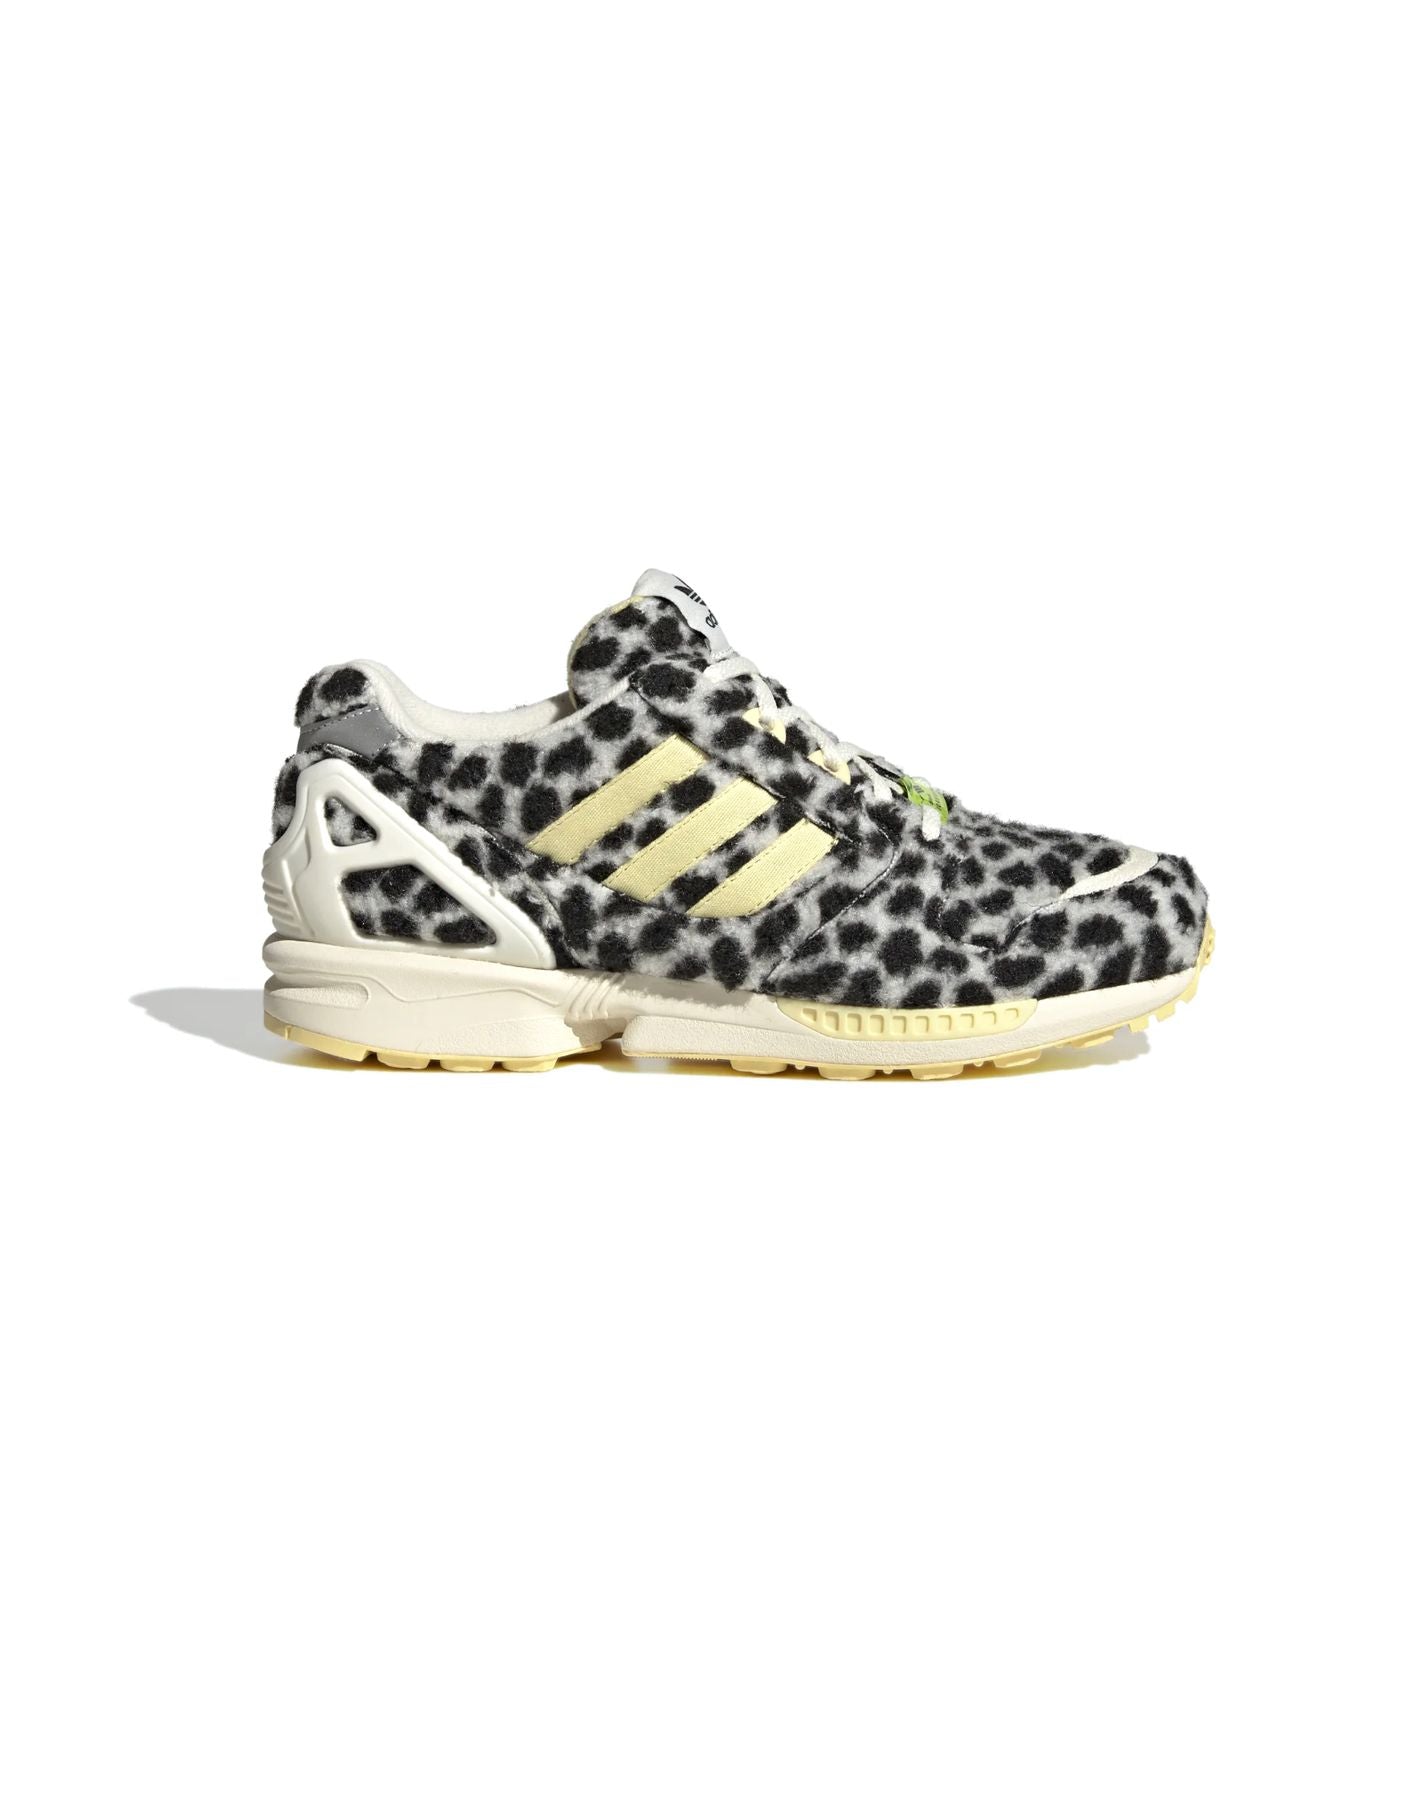 Shoes for woman GX2018 ZX 8020 Adidas Originals